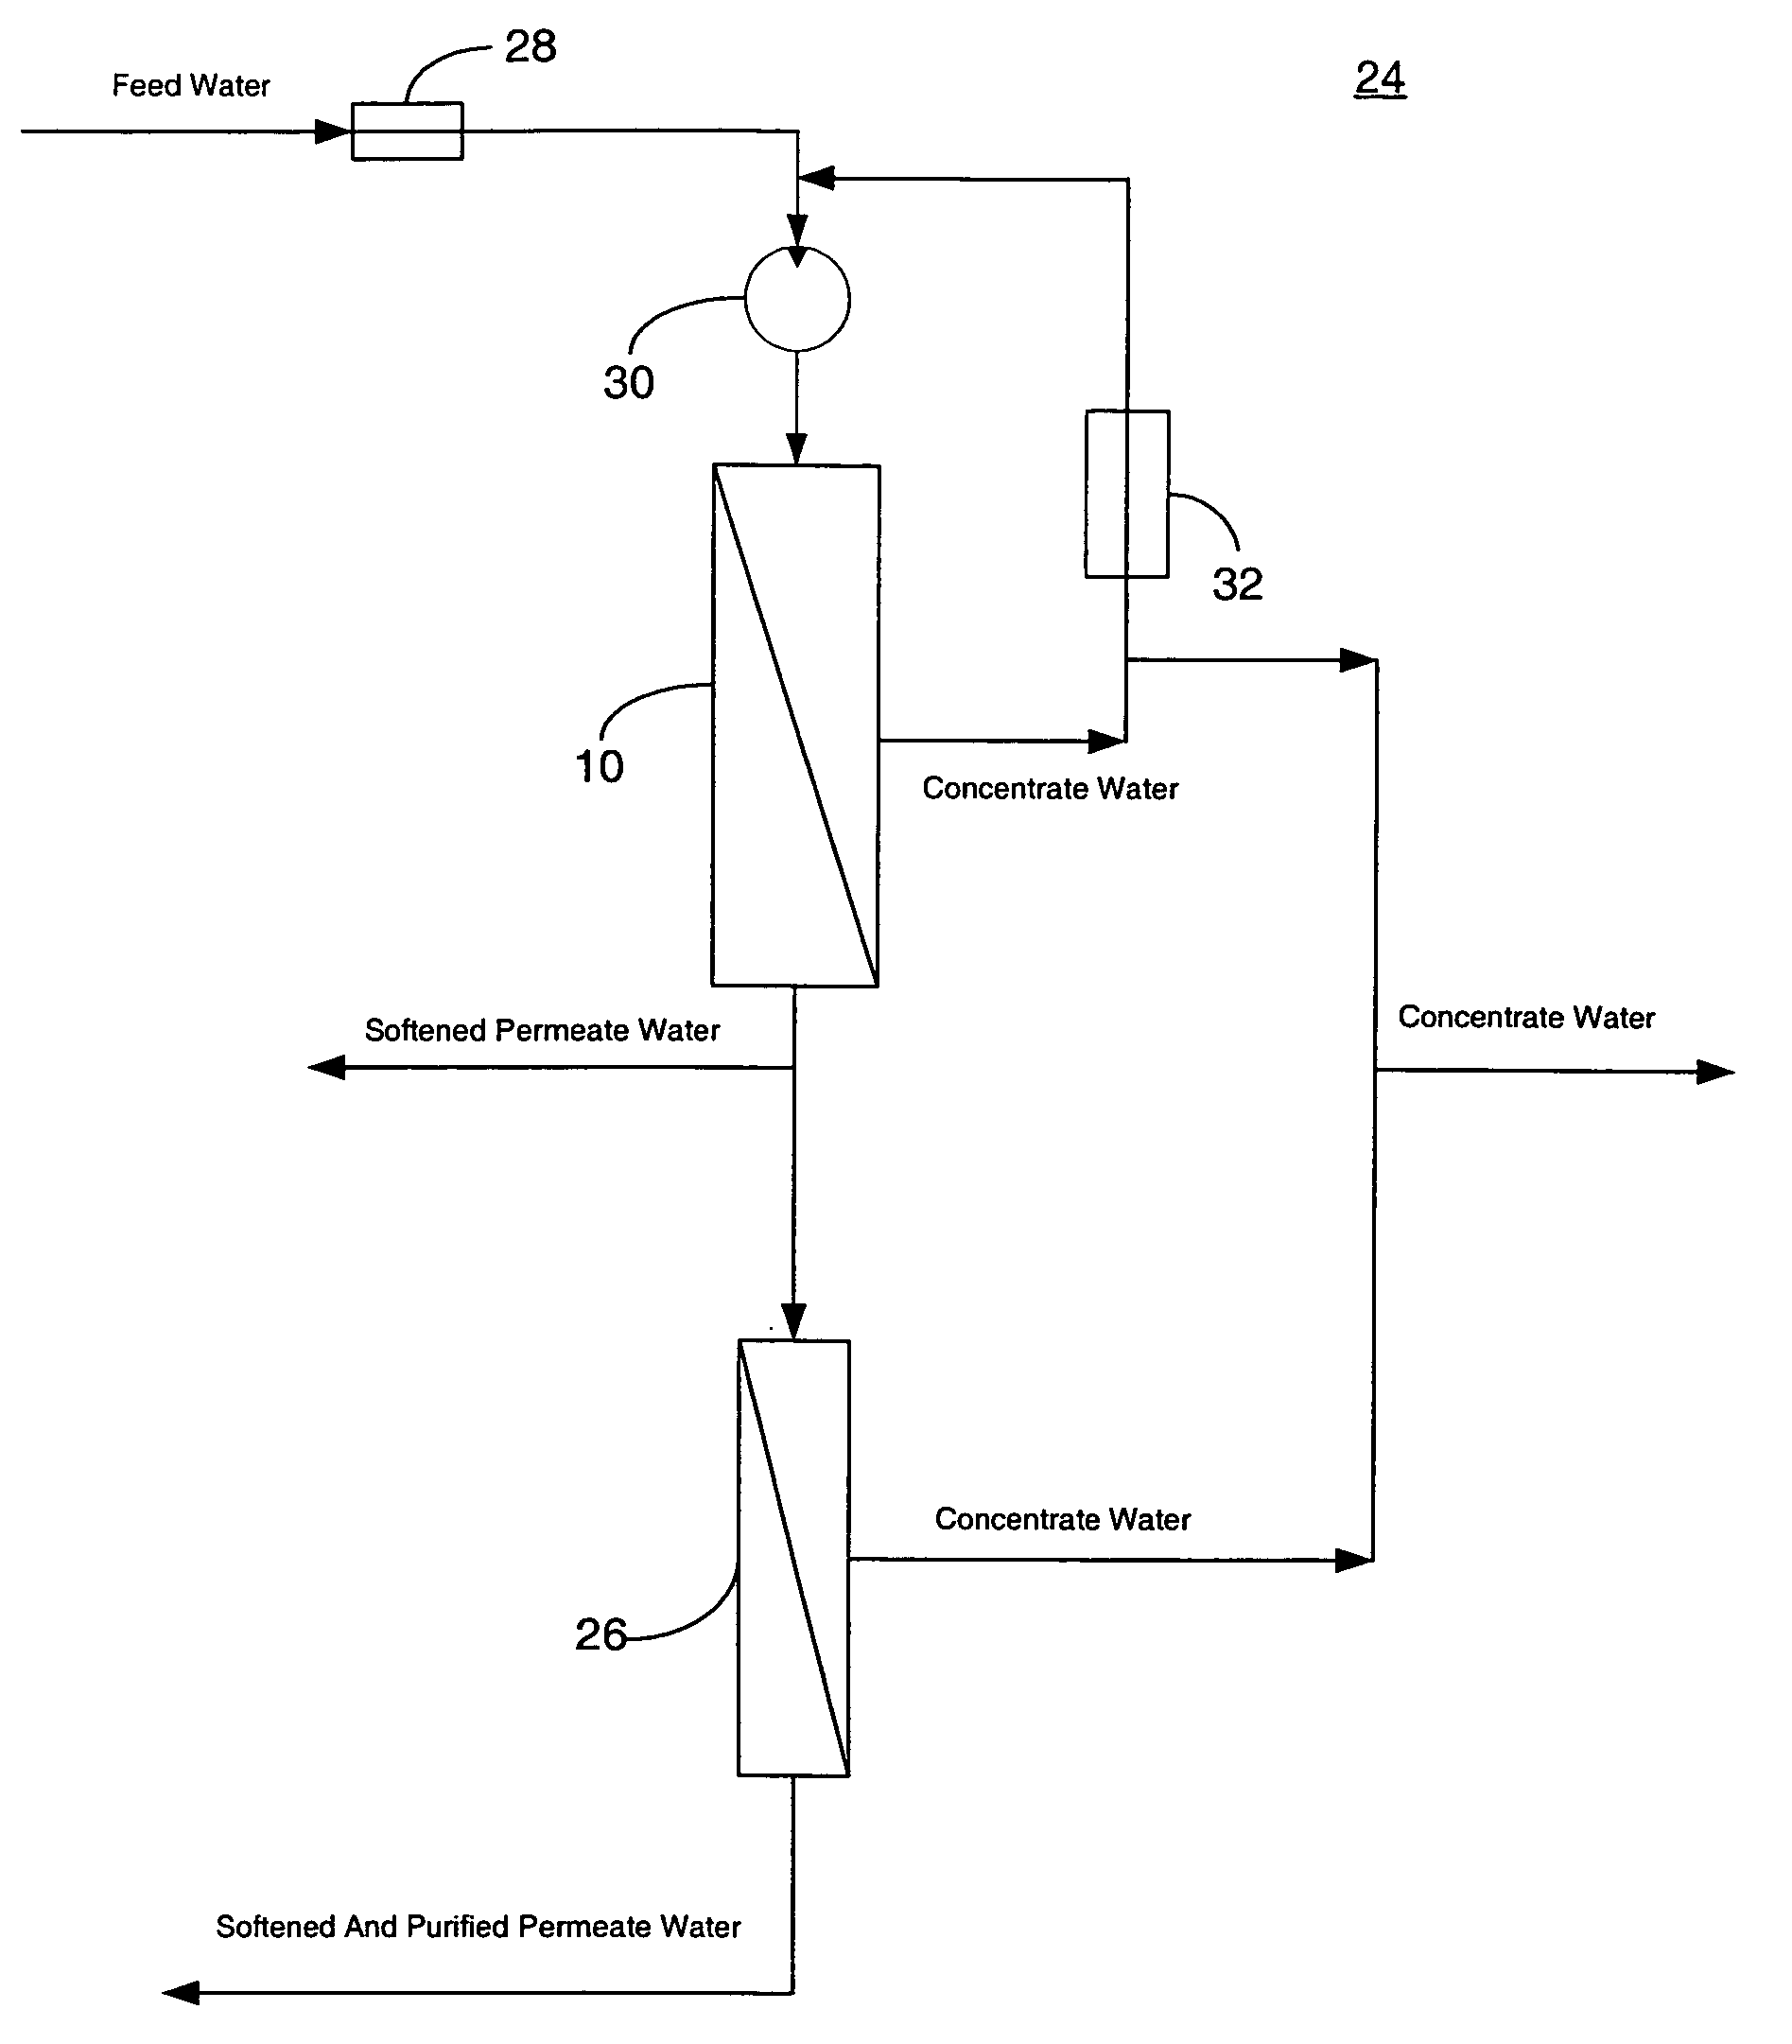 System and method for conditioning water